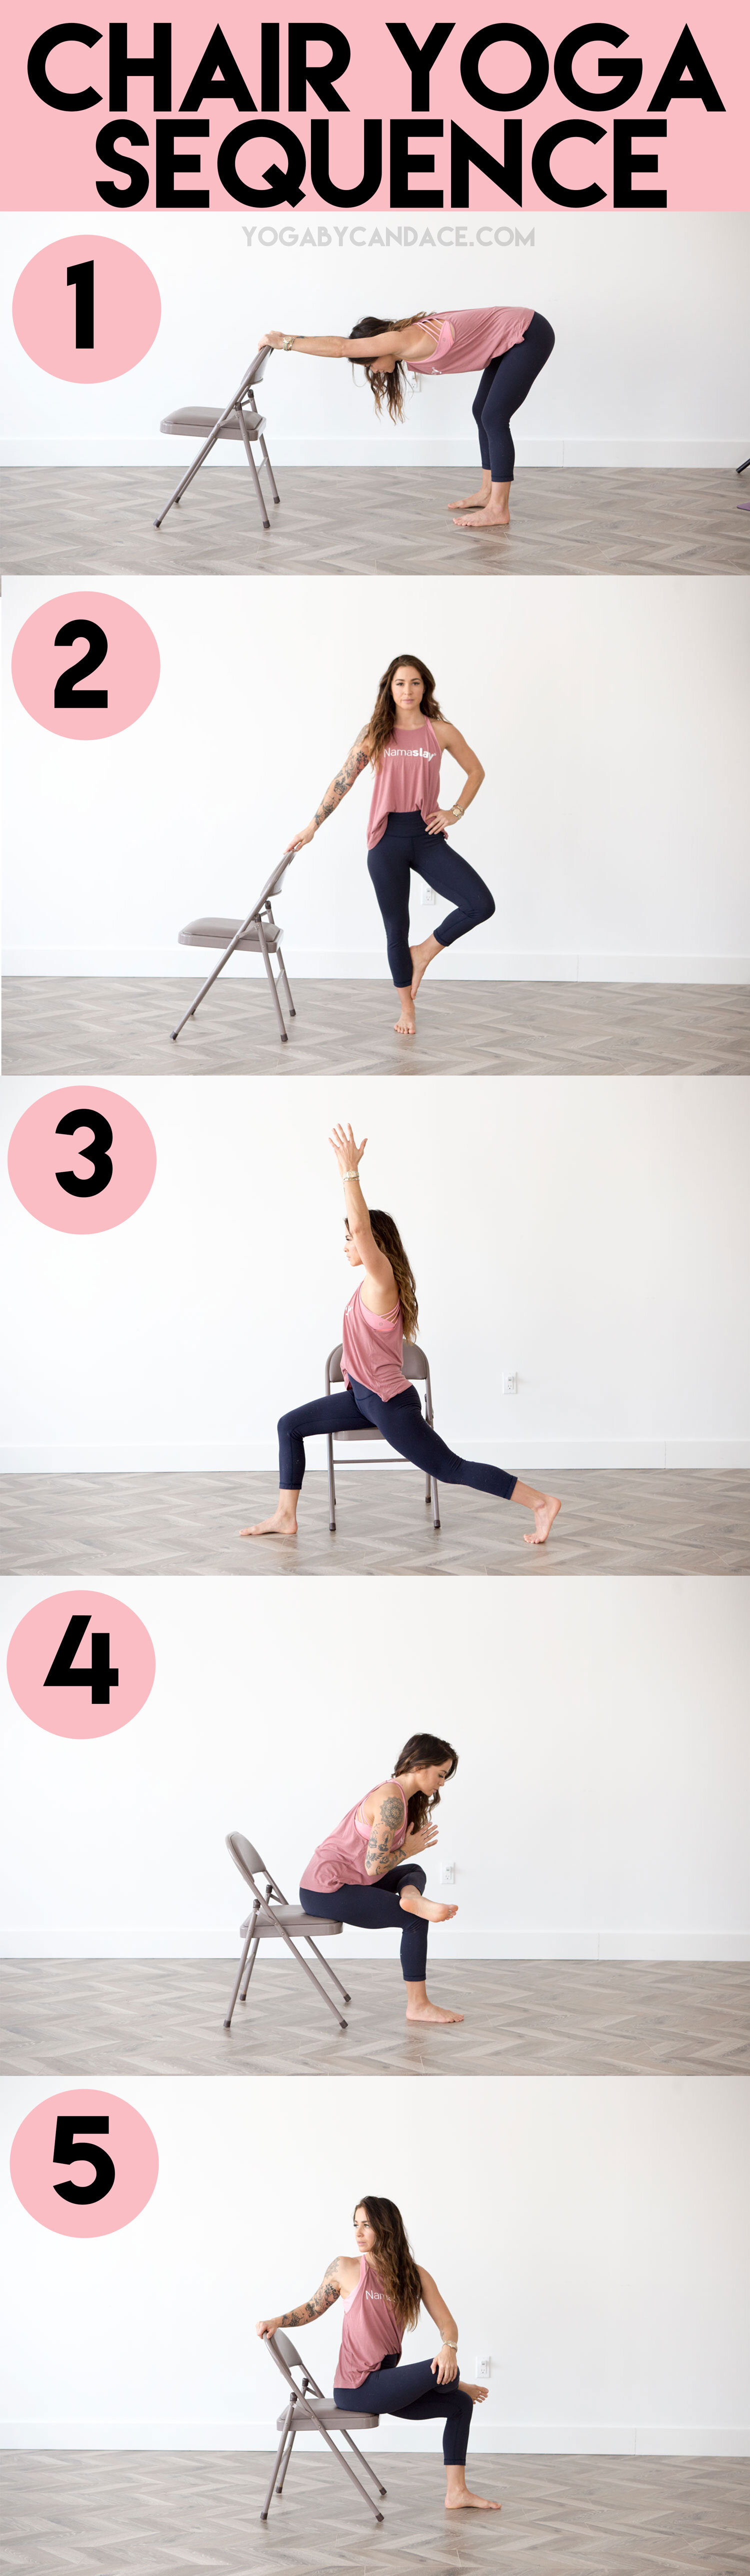 Easy And Simple Yoga Poses For Office That You Can Do At Your Desk